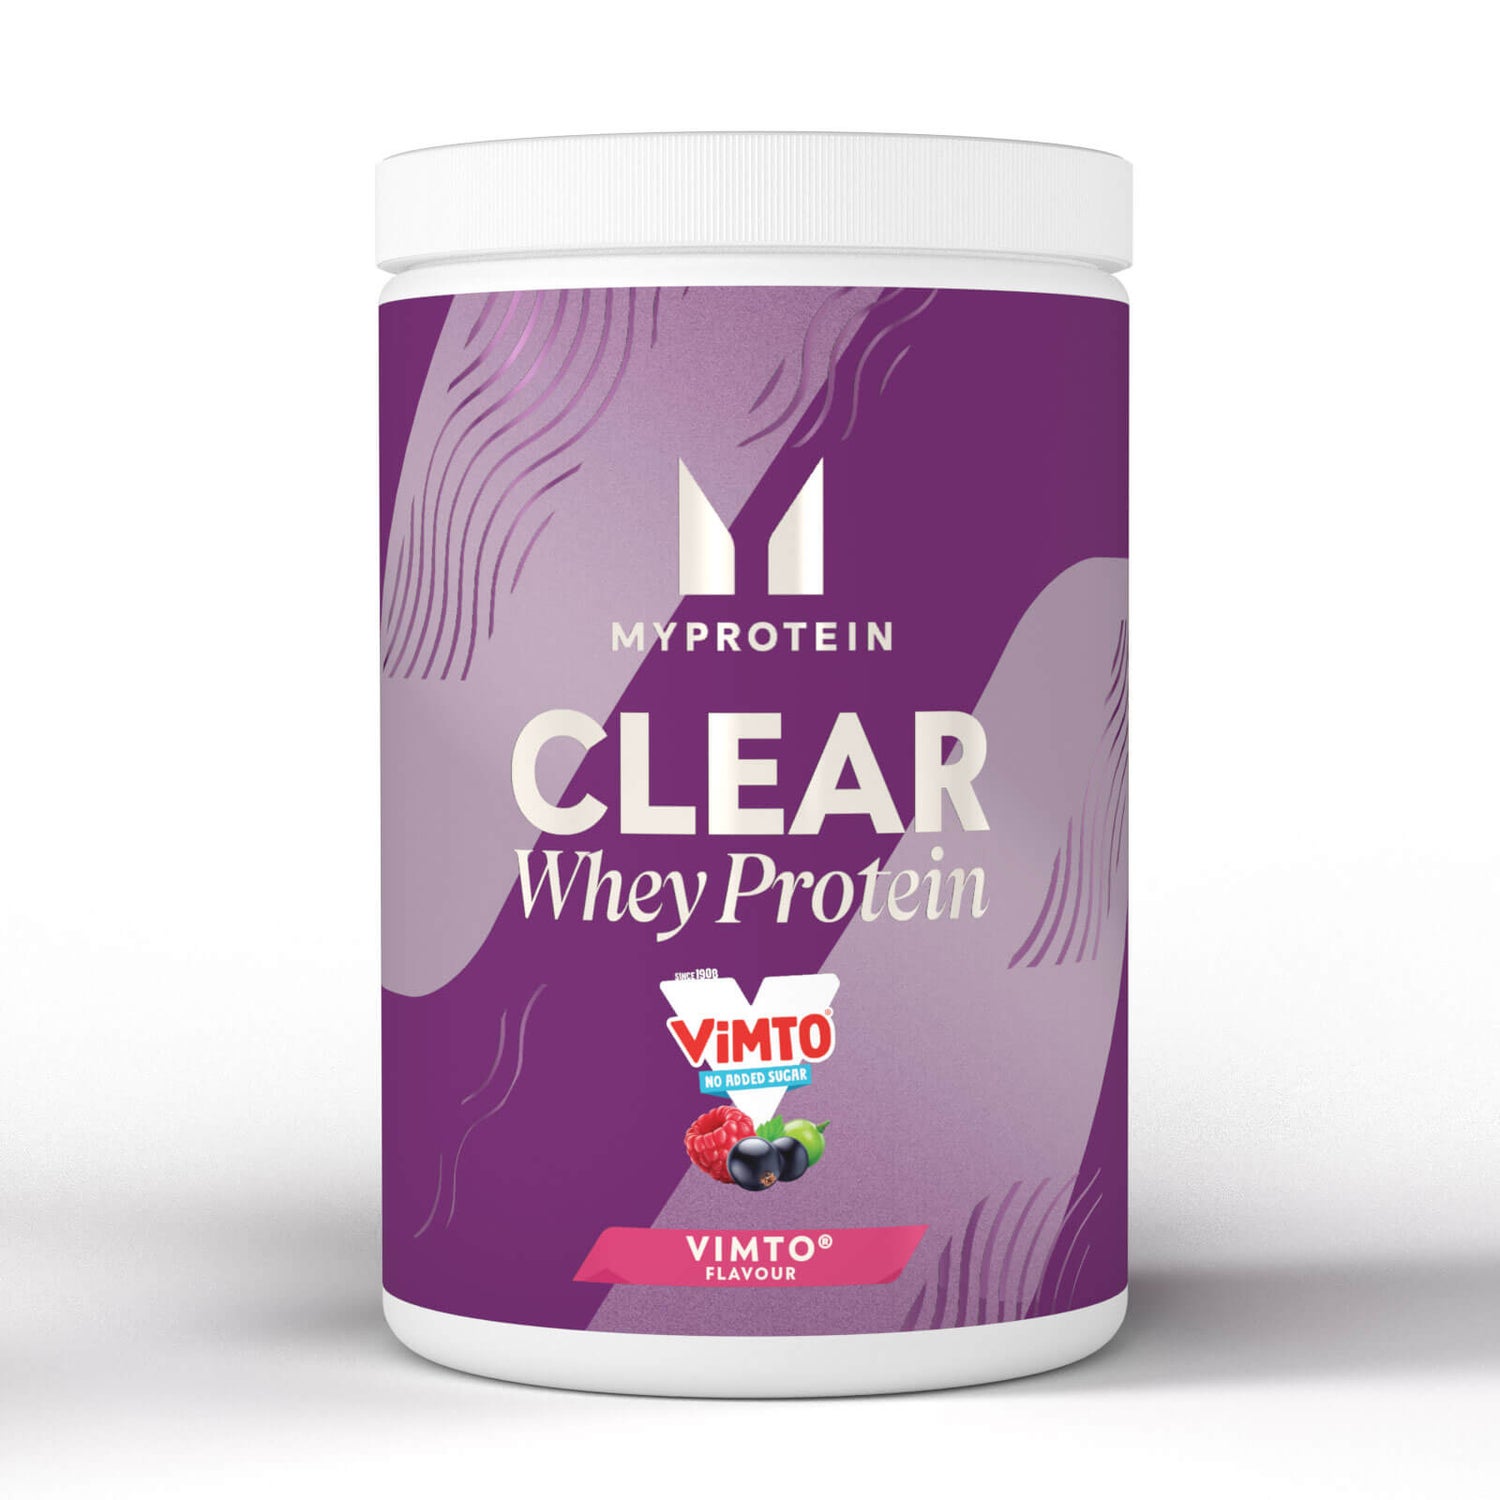 Myprotein Clear Whey Isolate, Vimto Remix Limited Edition, 20 Servings